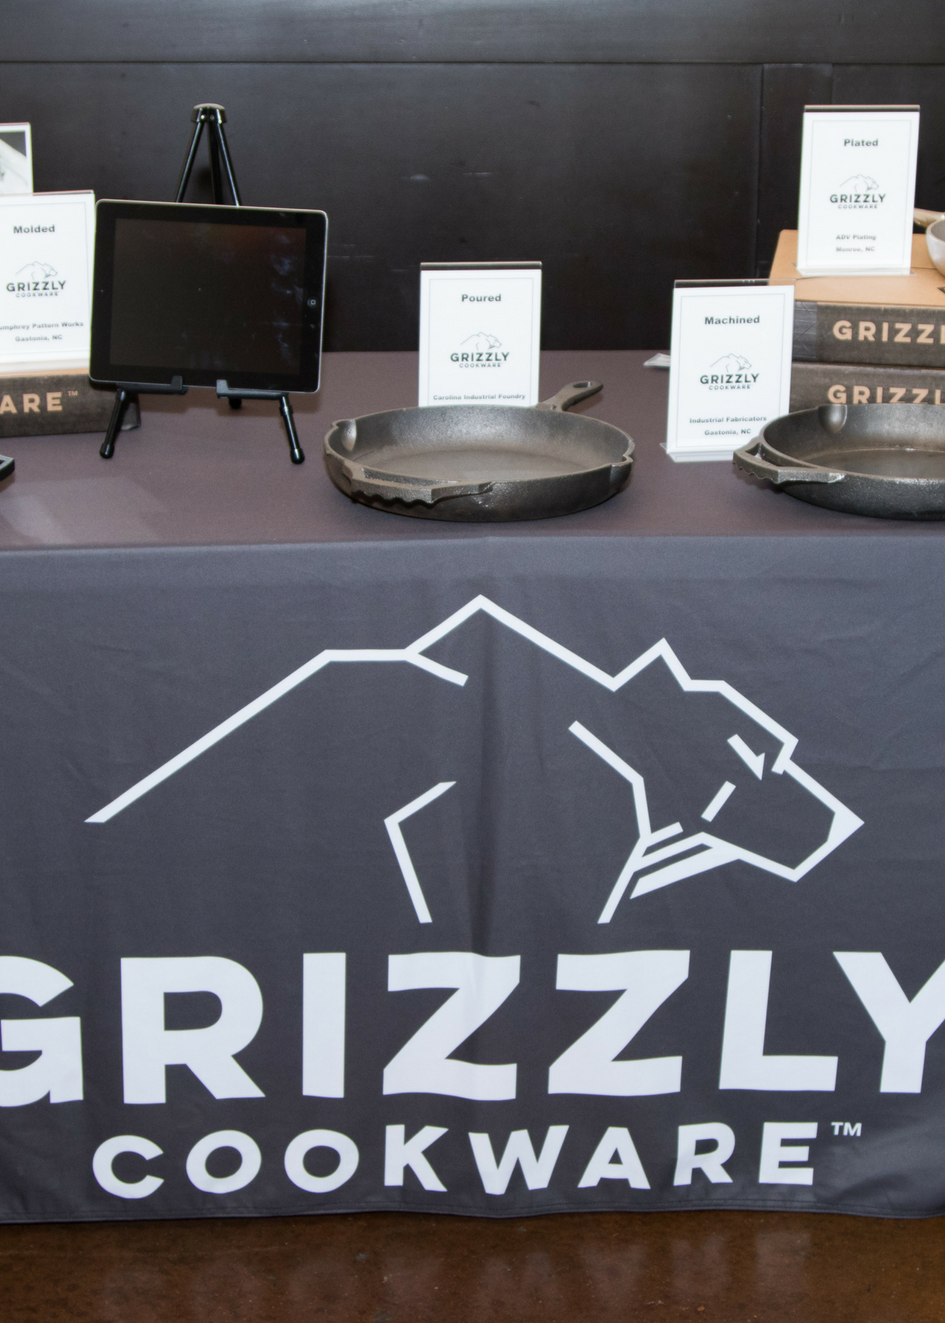 GRIZZLY Cookware Pre-Launch Event